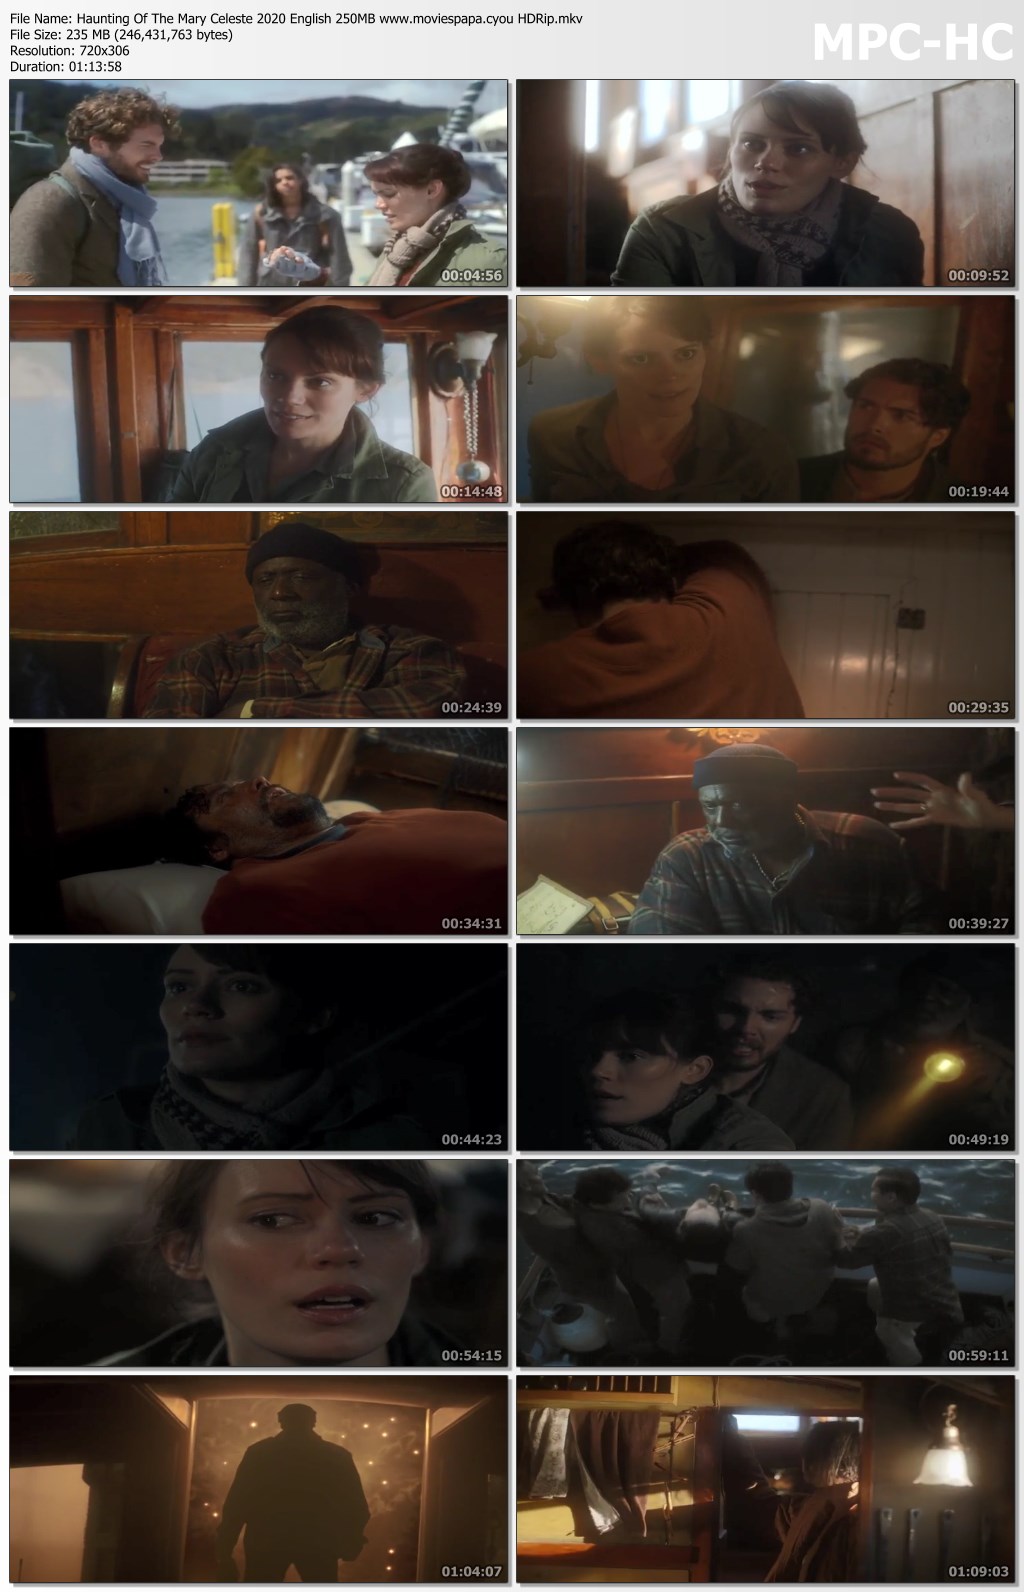 Haunting Of The Mary Celeste 2020 English 240MB HDRip Download.